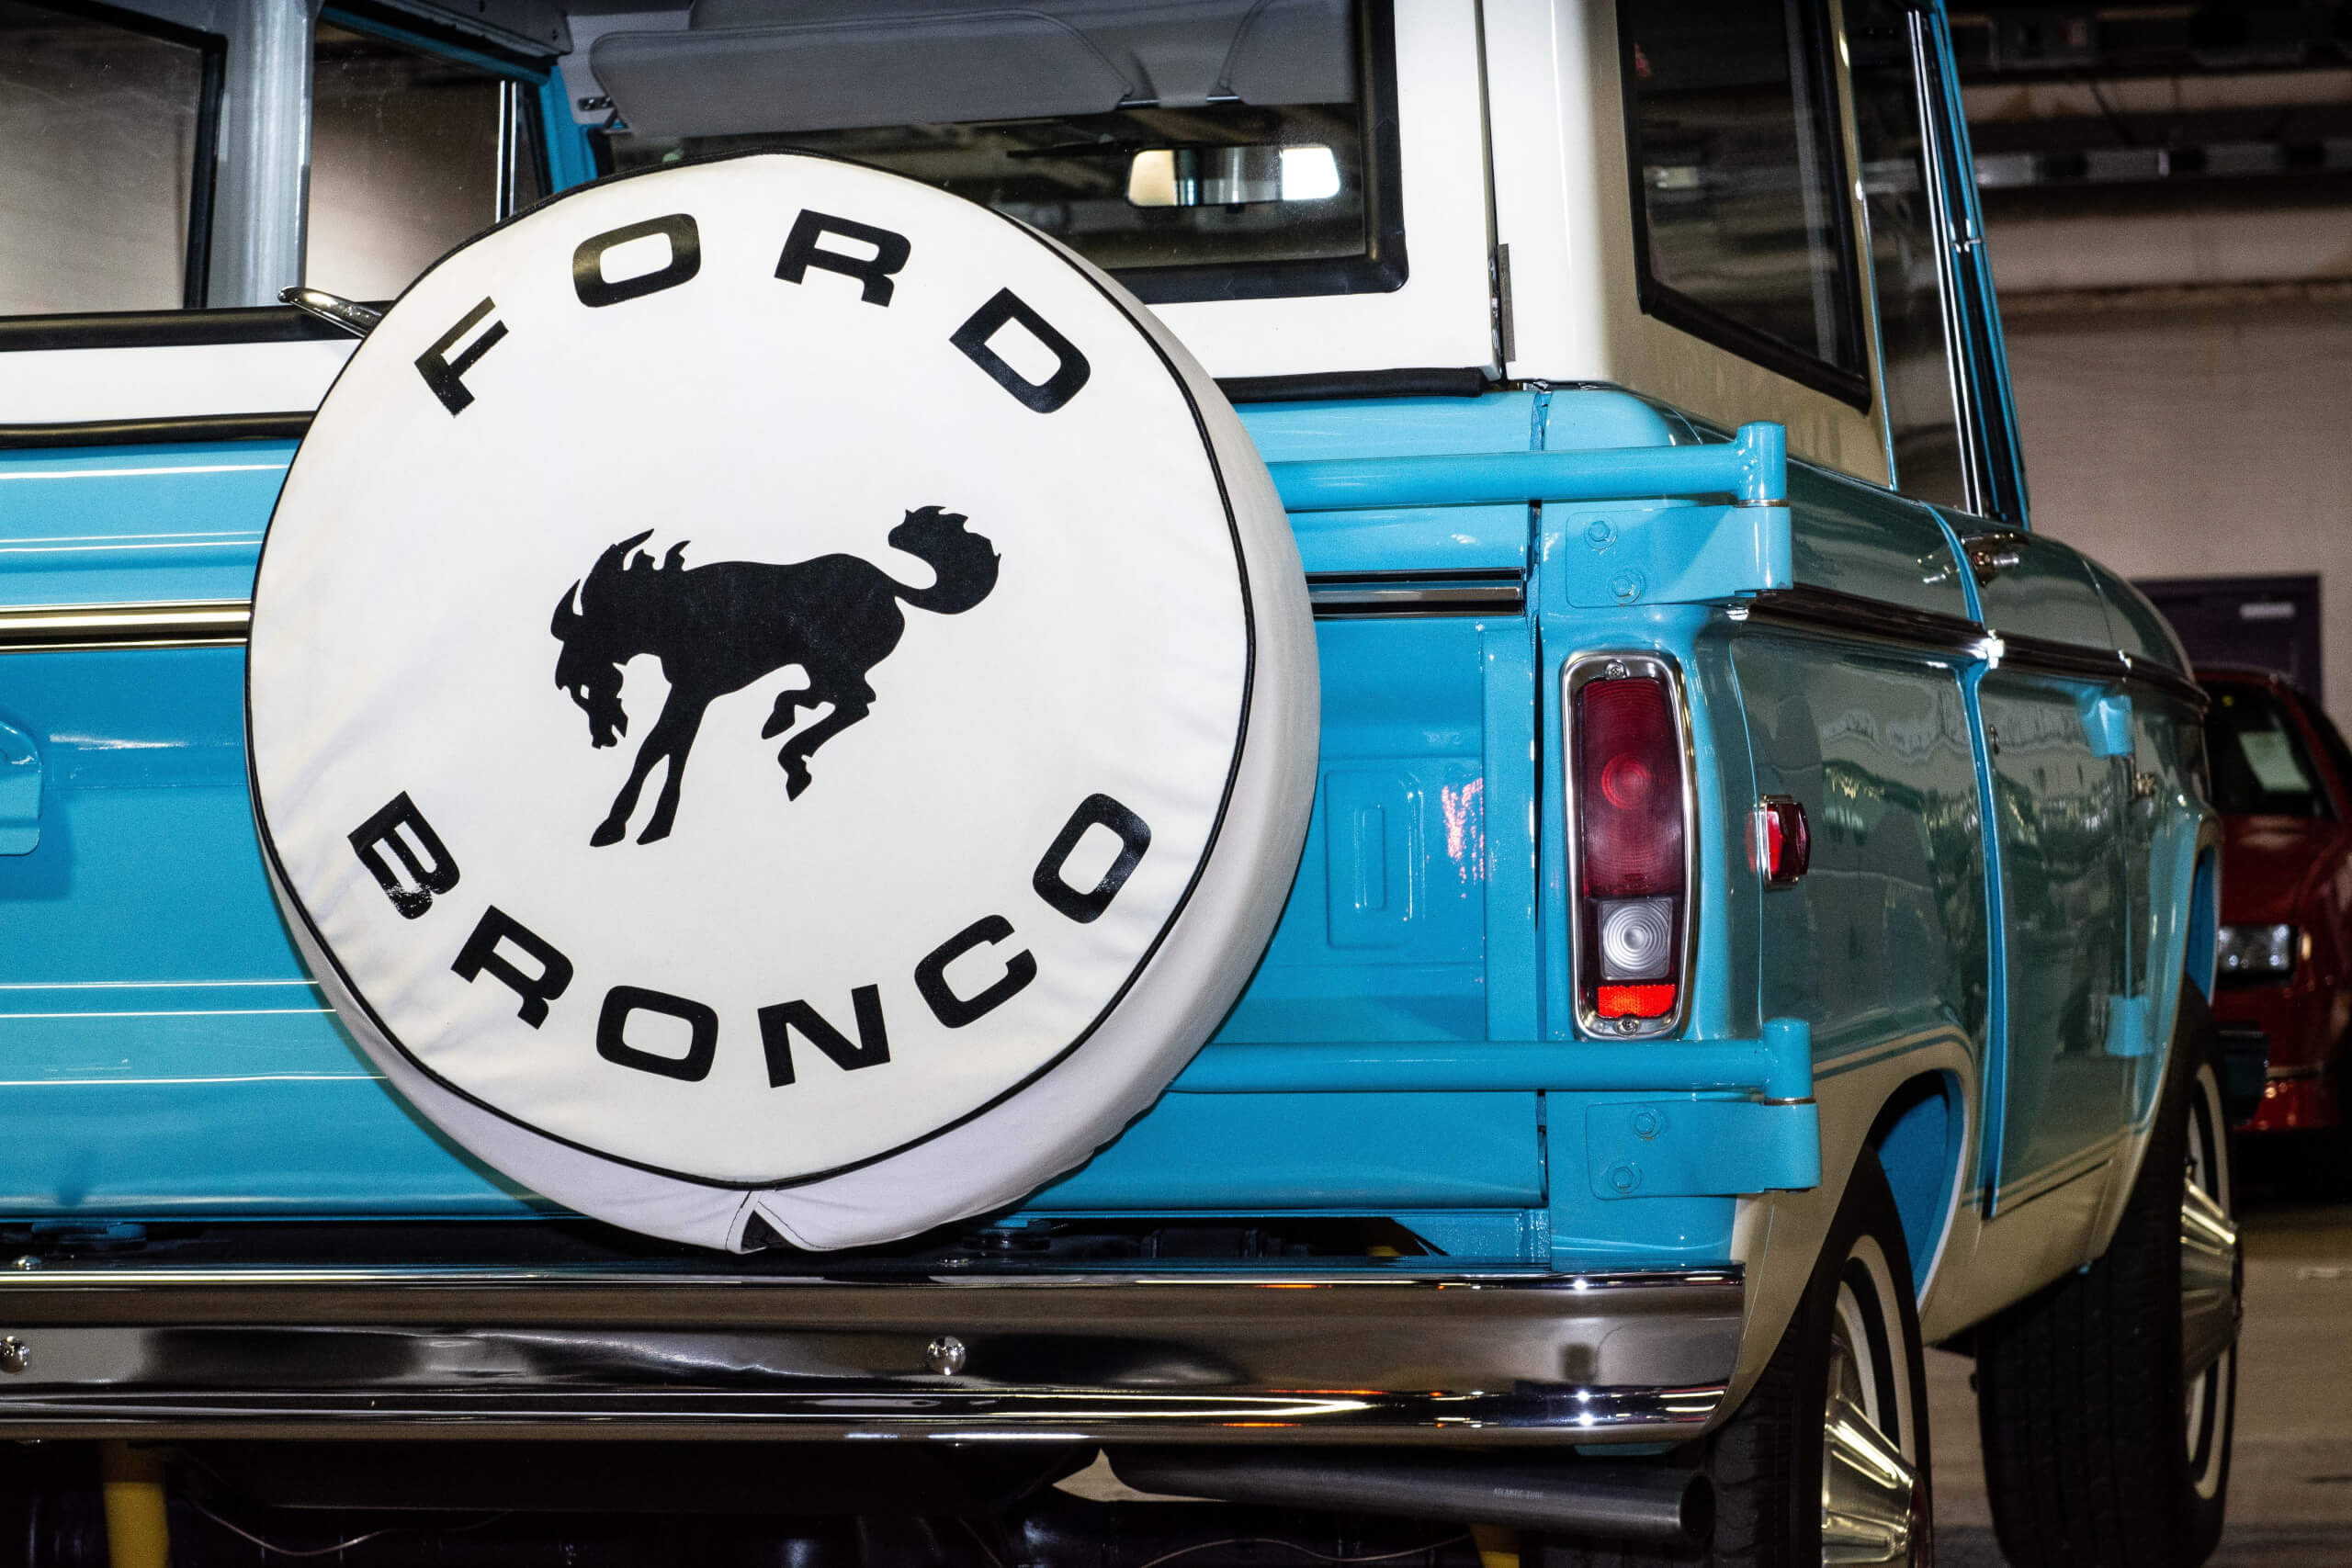 This 1975 Ford Bronco, painted in Peacock Blue, crossed the 2019 Mecum Auctions Harrisburg block.